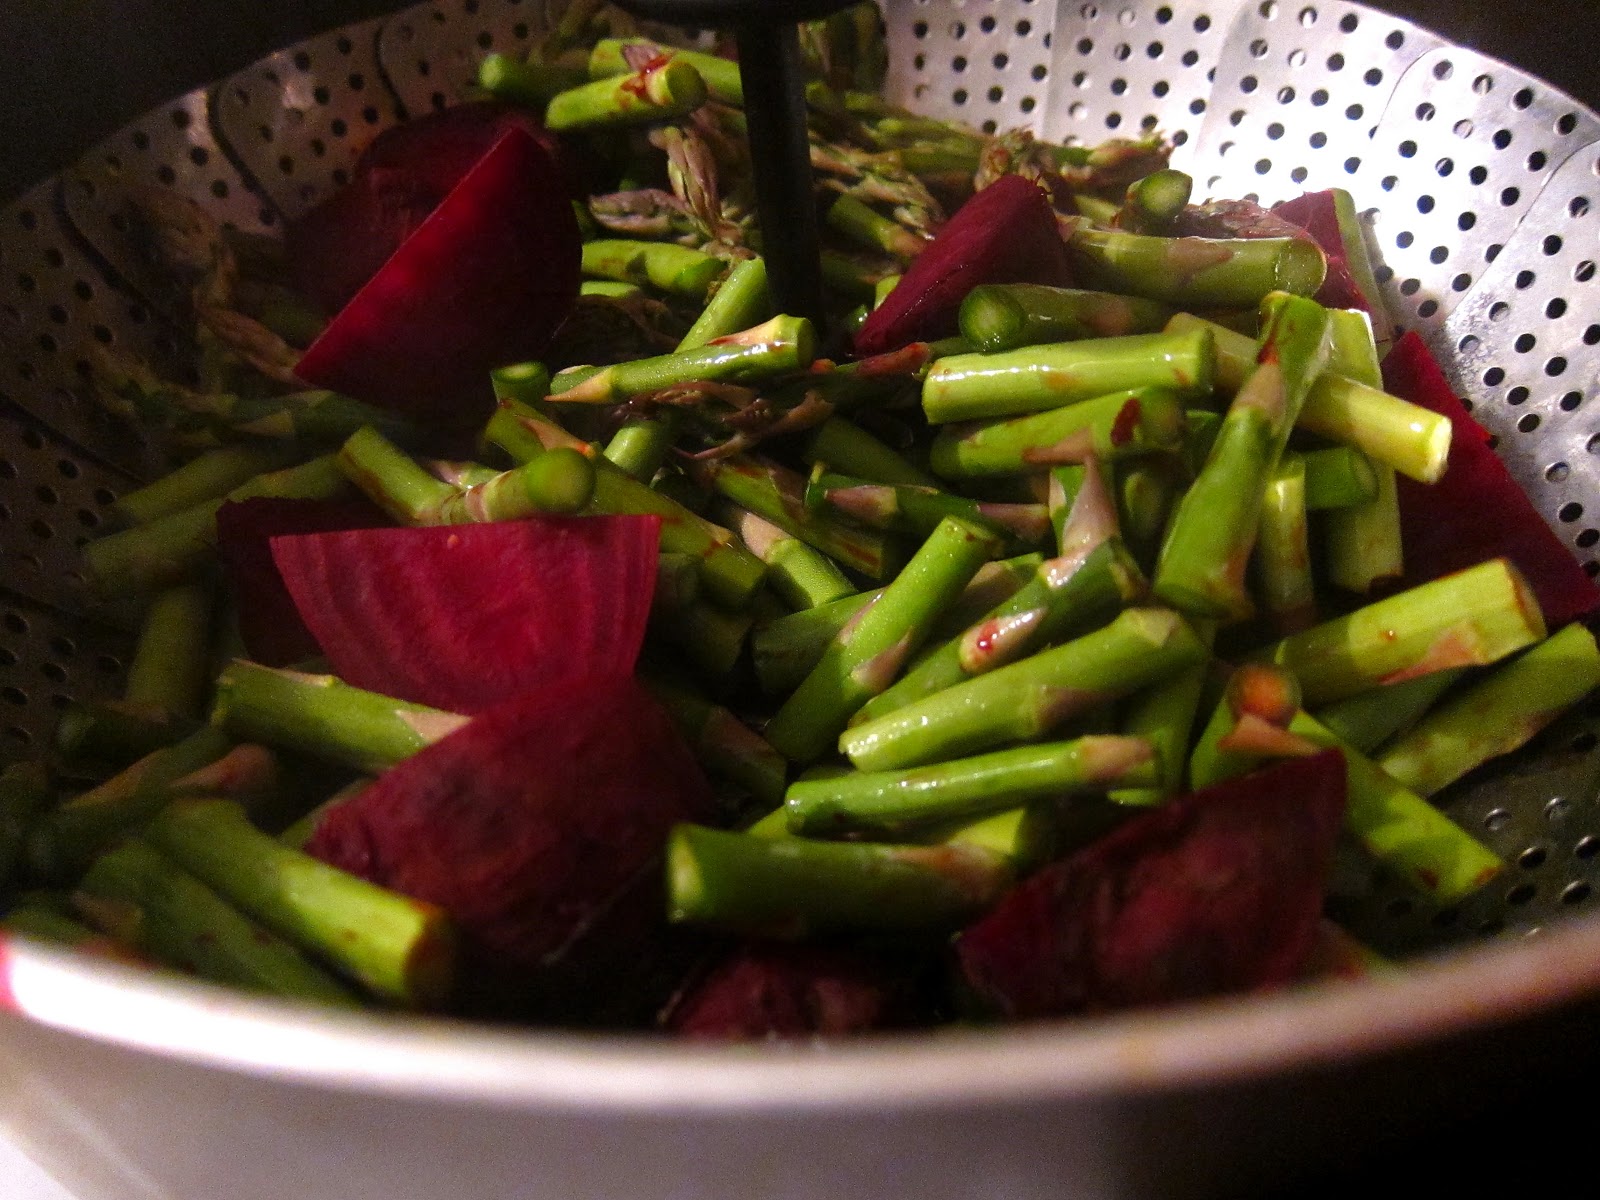 Migrant Kitchen: Pink Pesto Pasta with Beets, Asparagus, and Goat Cheese